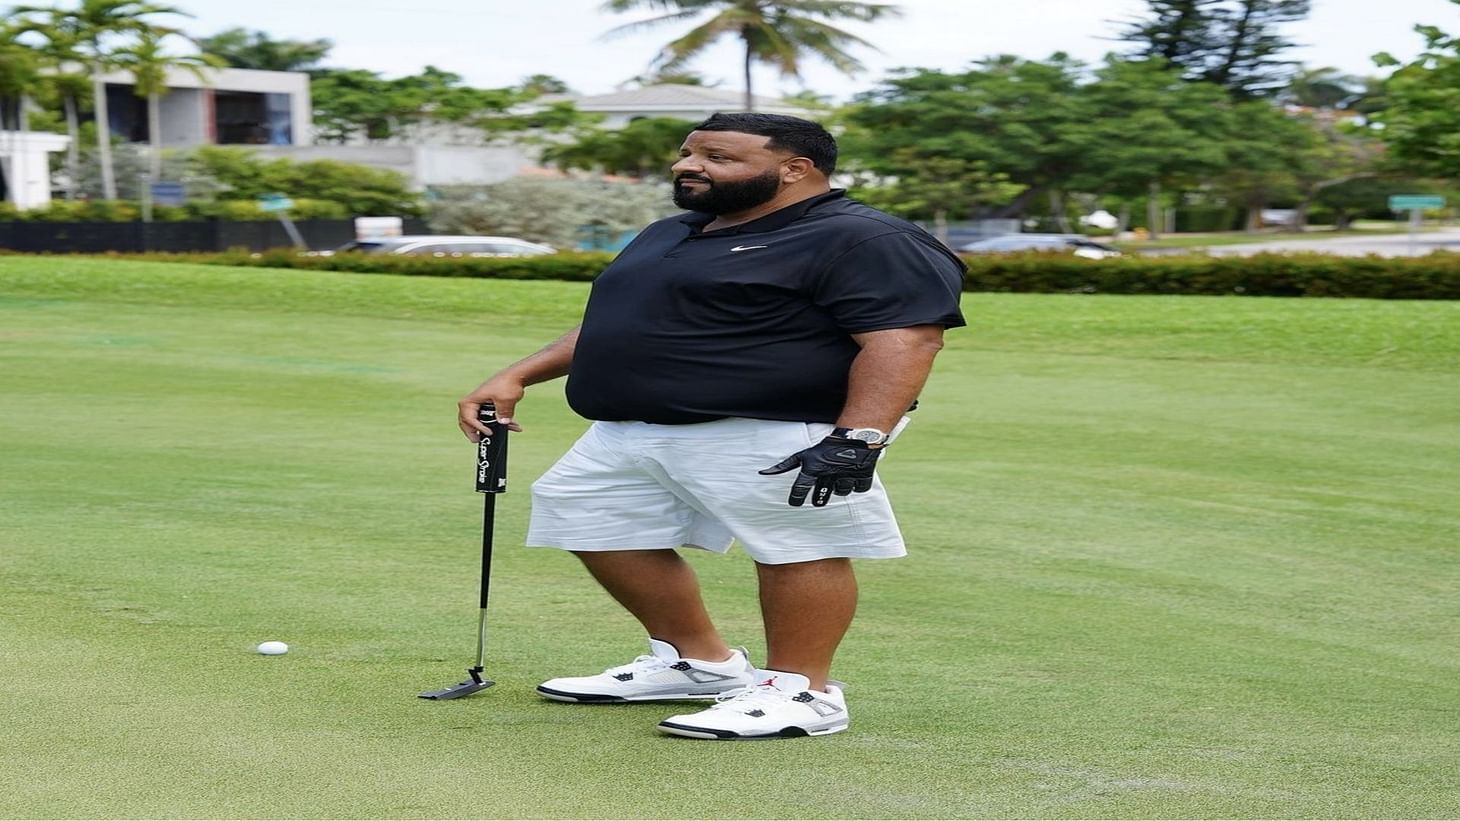 Lets Go Golfing Dj Khaled Reveals His Passion For Golf Which Helped Him Lose 15 Lbs 